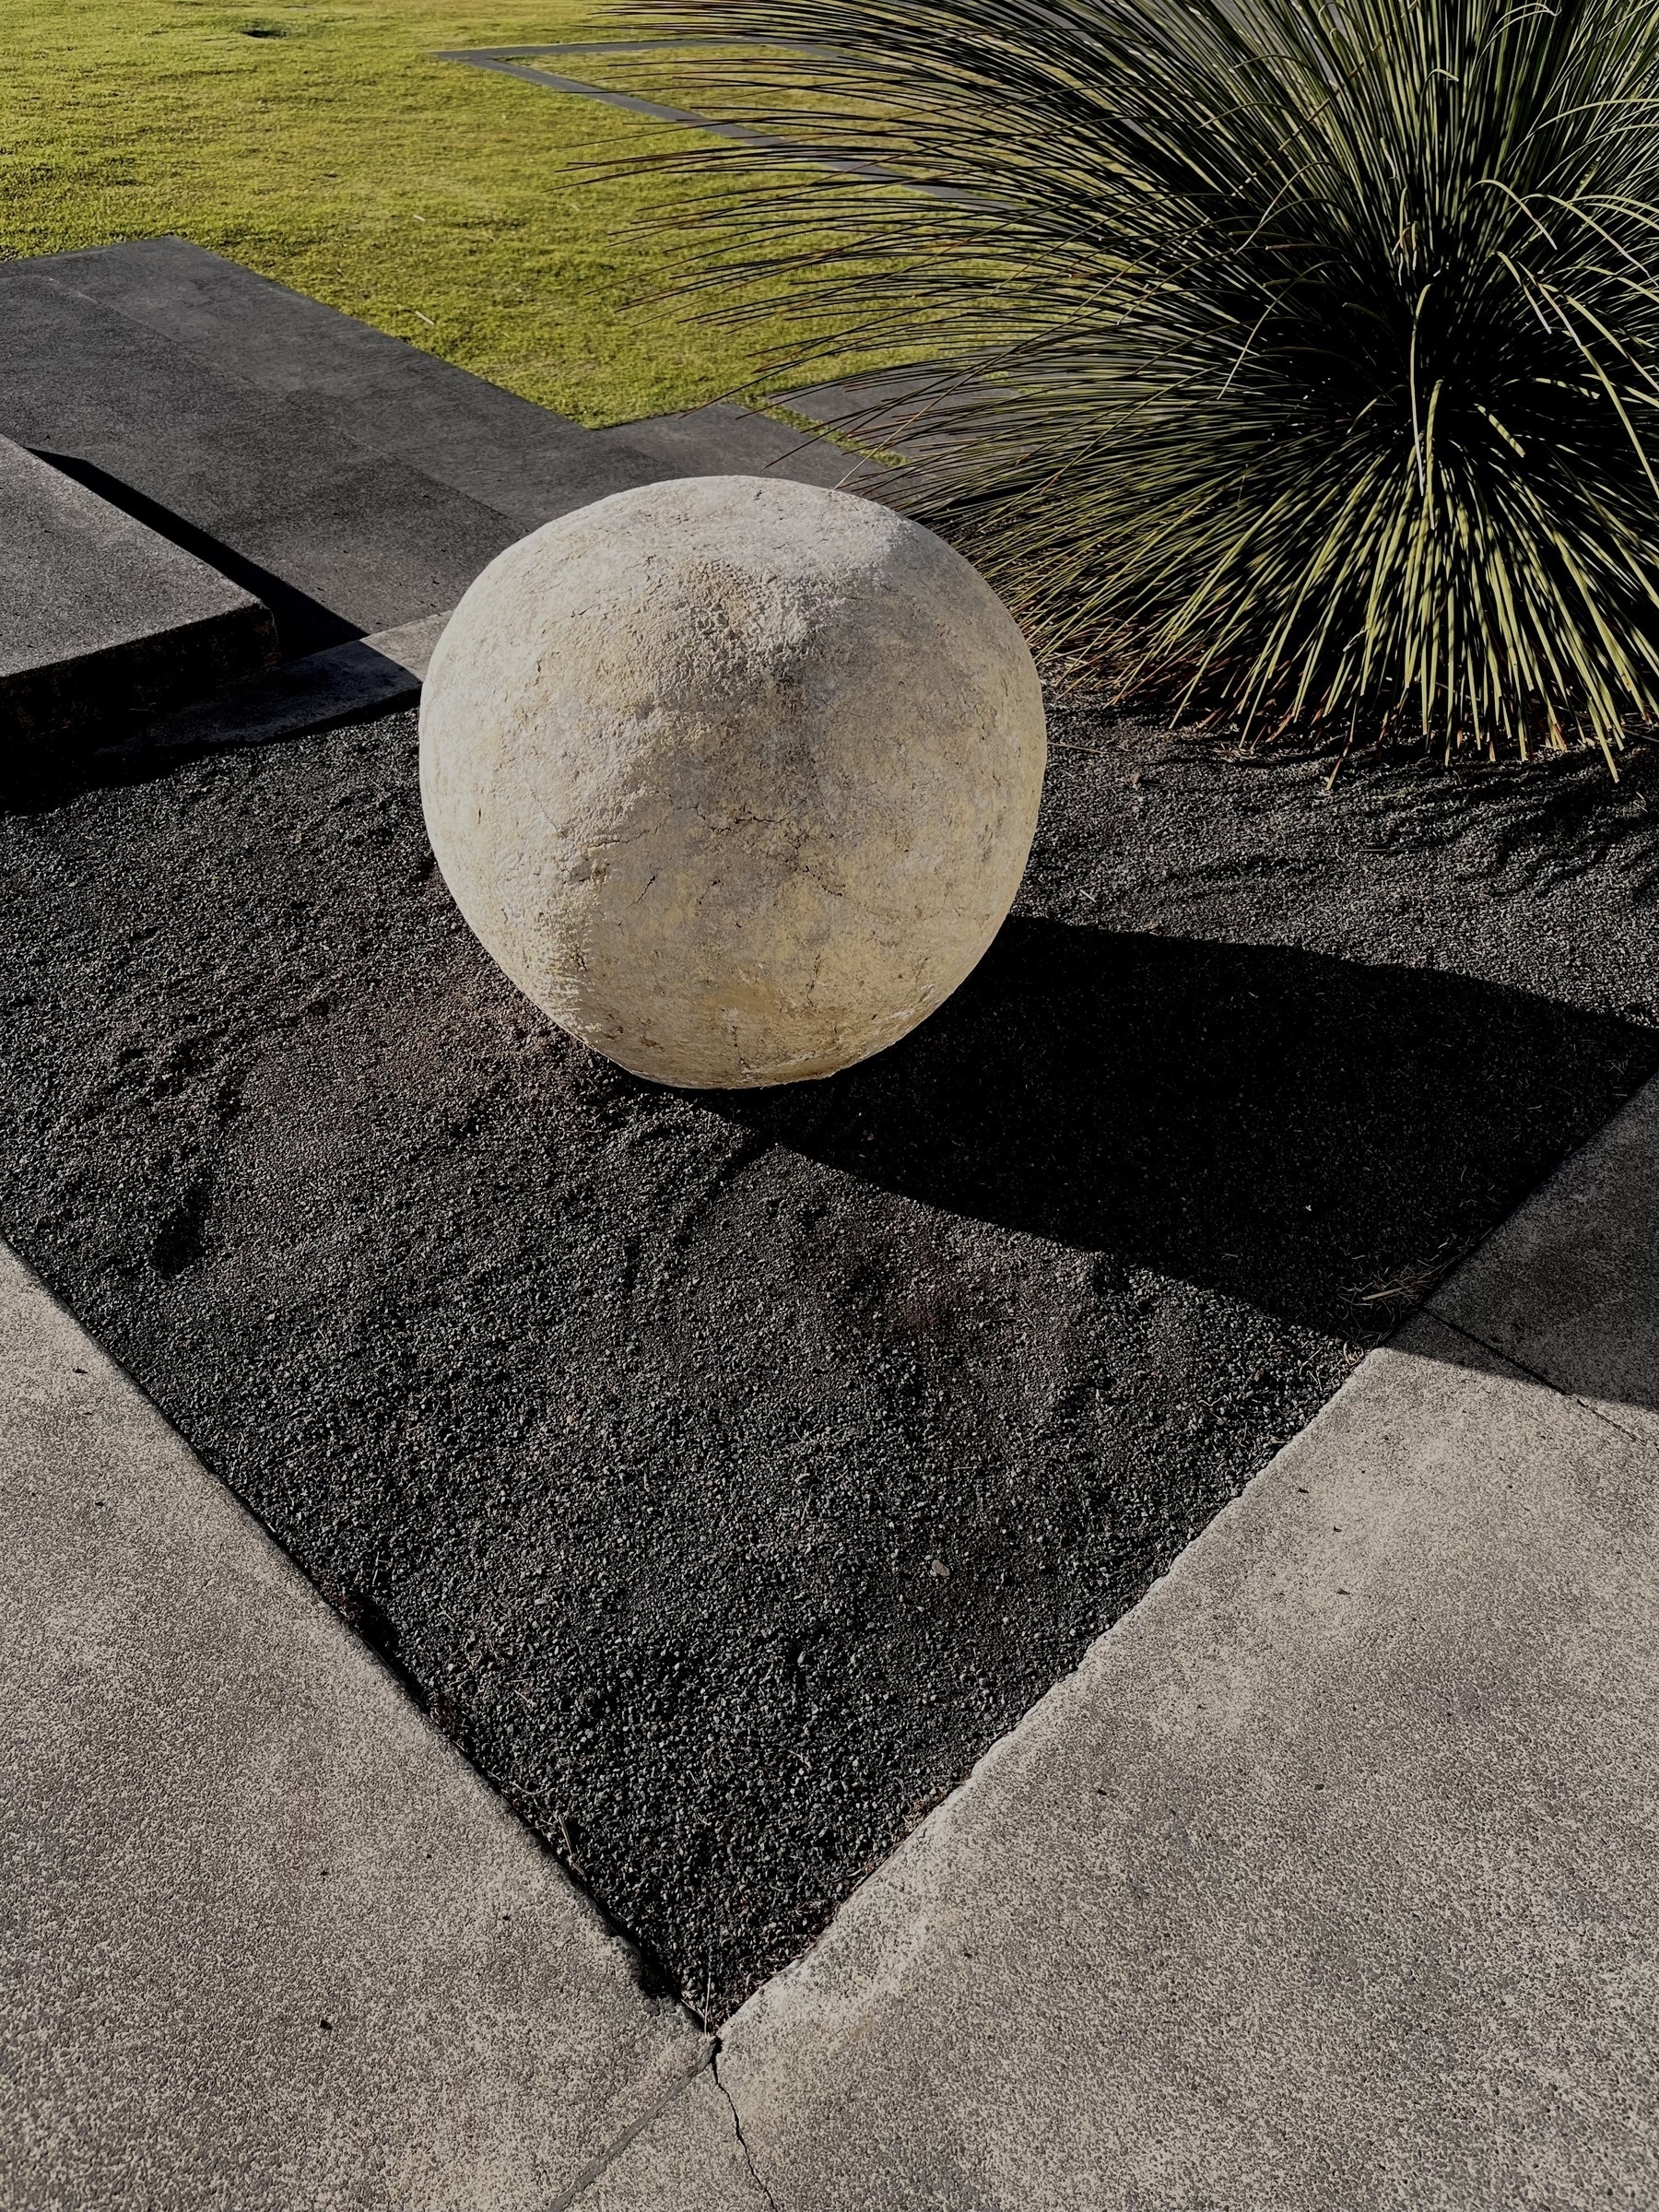 A large stone sphere sits on a landscaped area with dark gravel, concrete pathways, and greenery in the background.